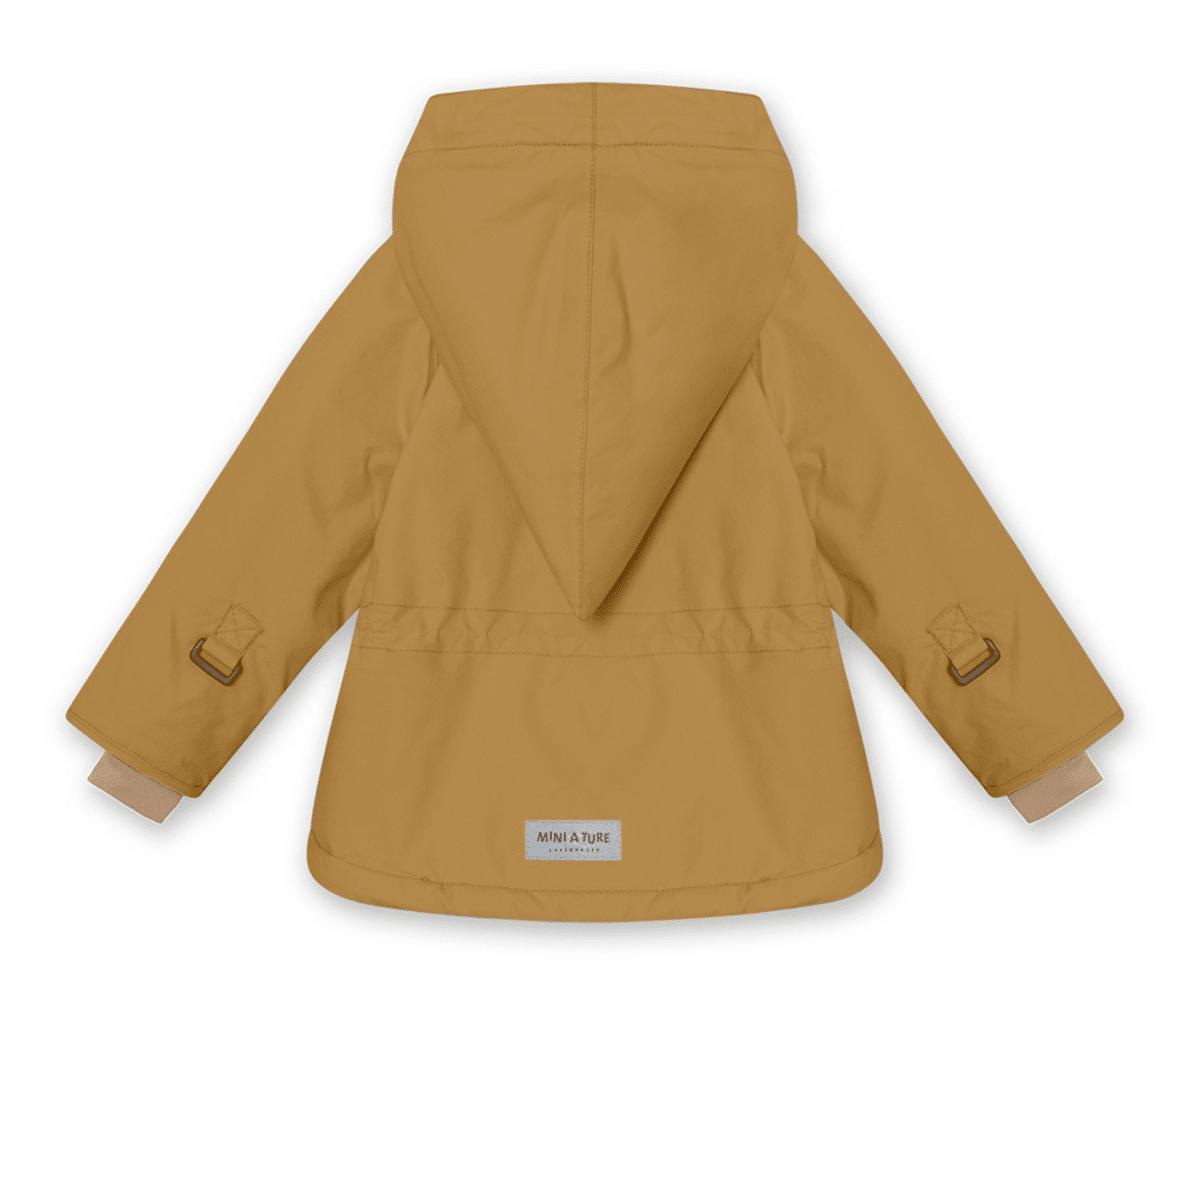 mini a ture mustard kids winter coat side zip back view on white background